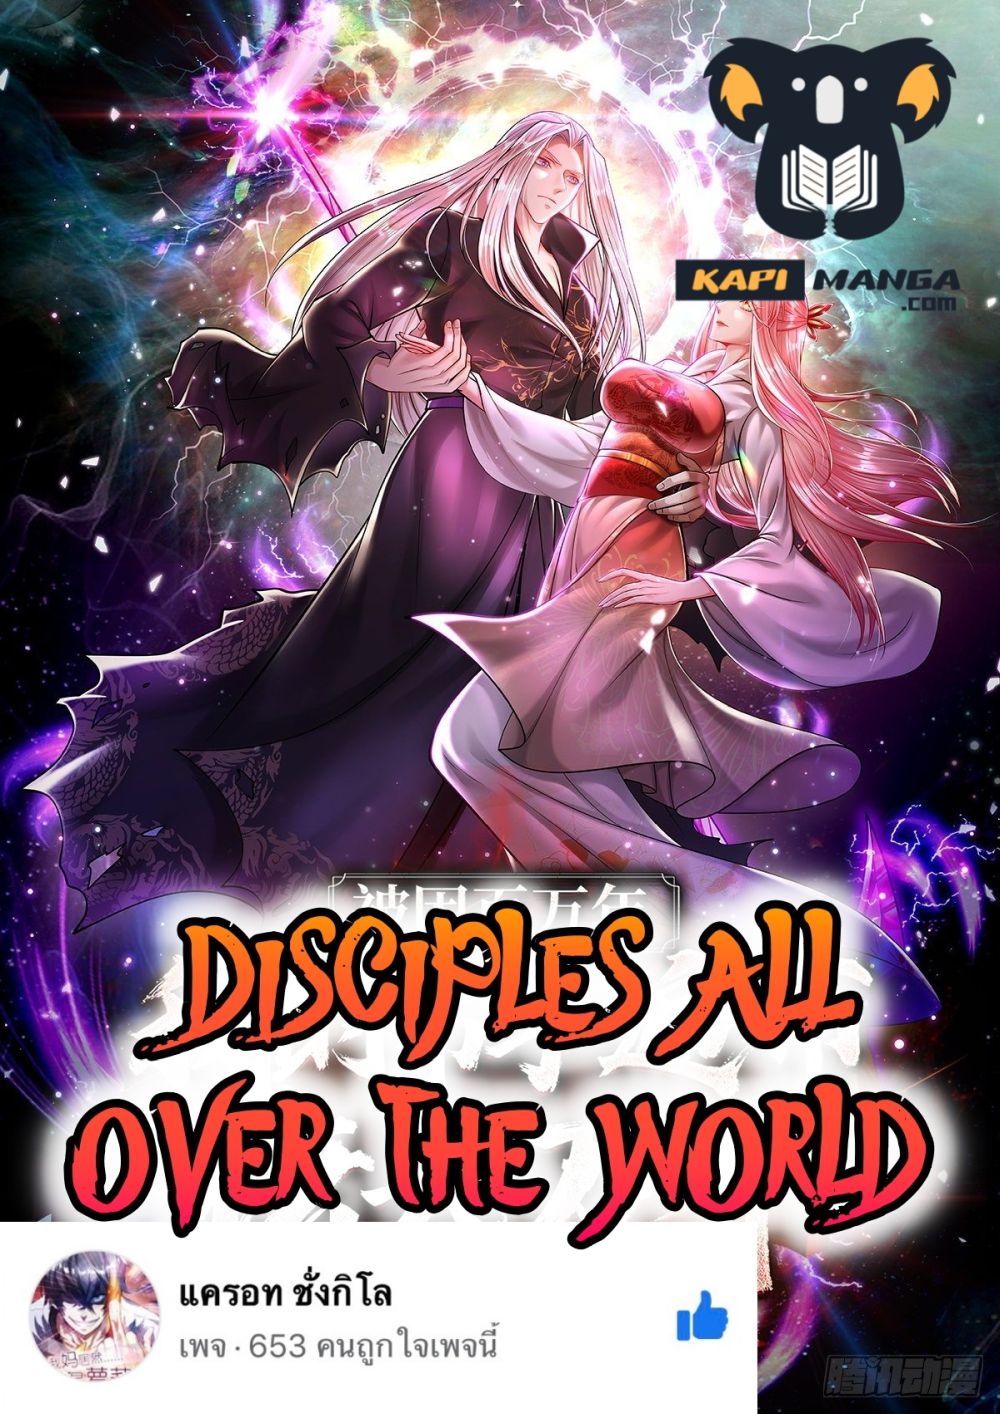 Disciples All Over the World à¸à¸­à¸à¸à¸µà¹ 40 (1)